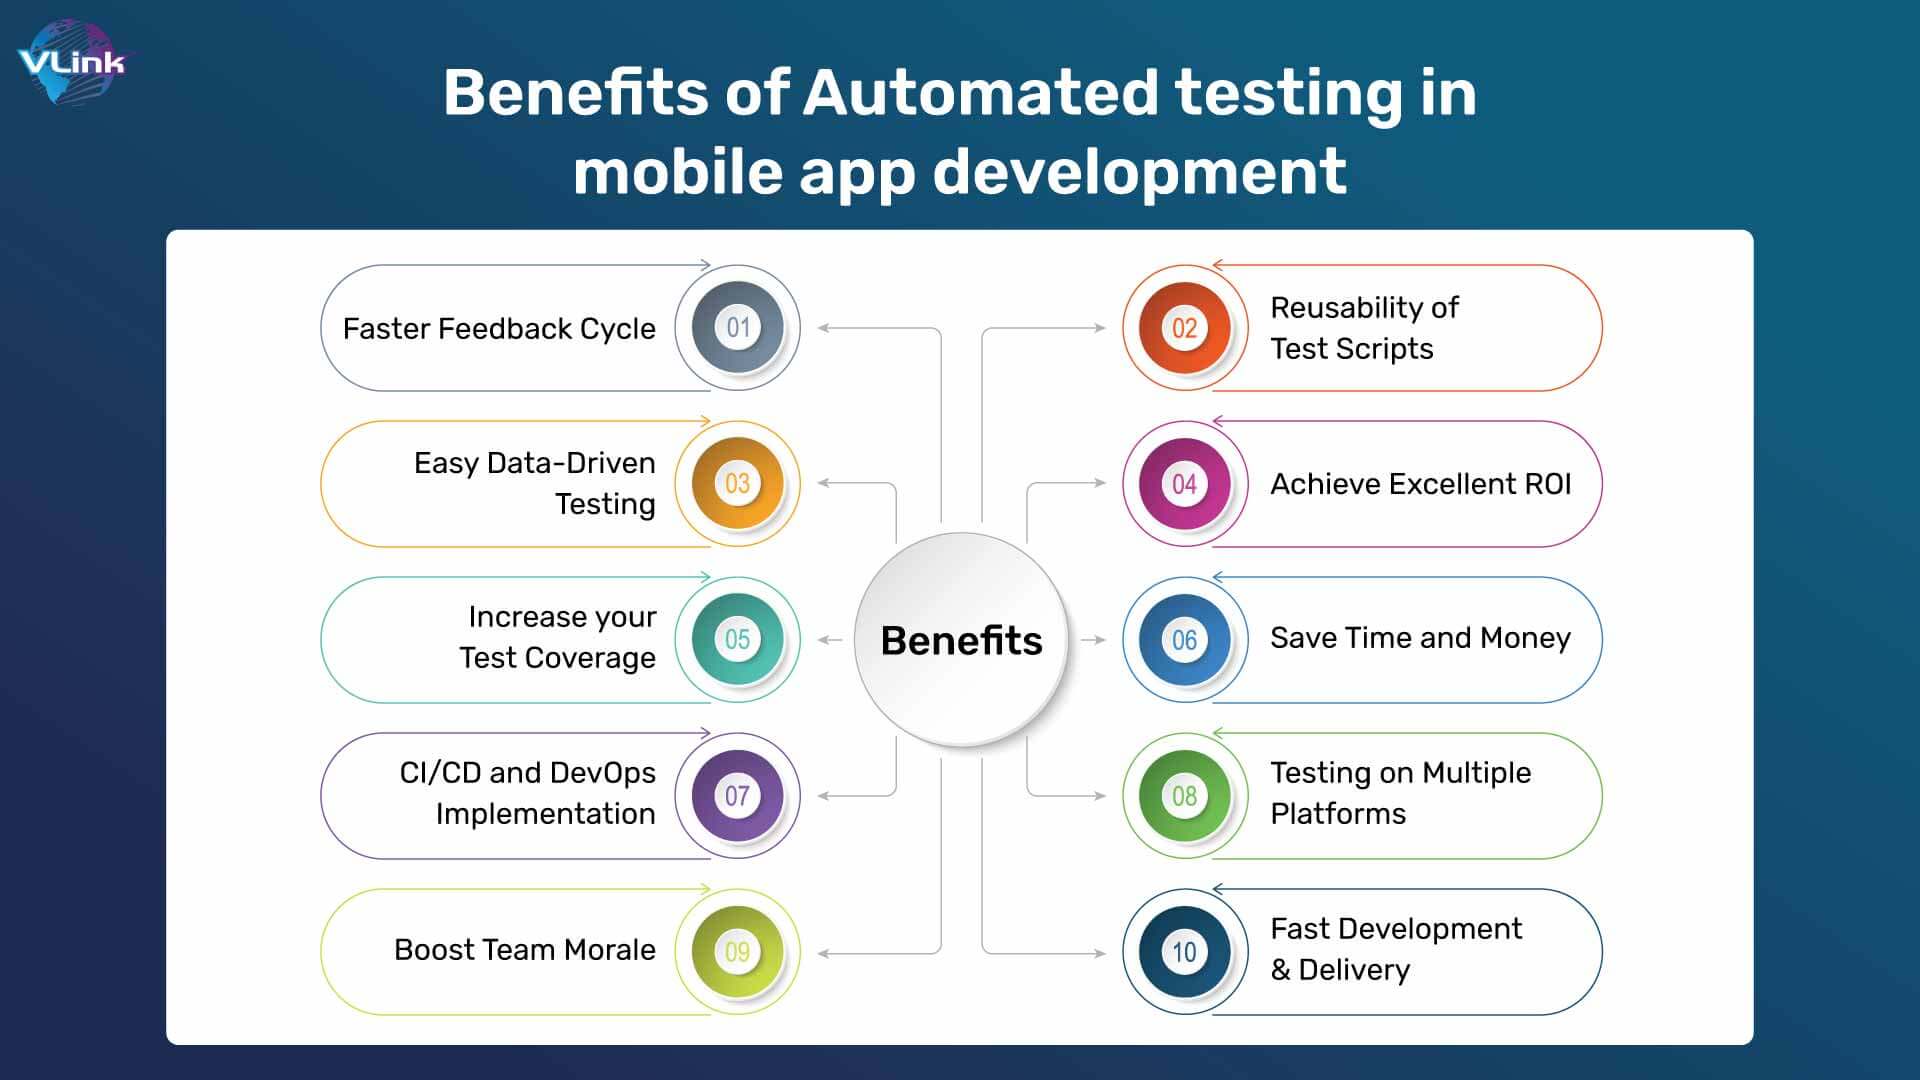 Benefits of Automated Testing in Mobile App Development